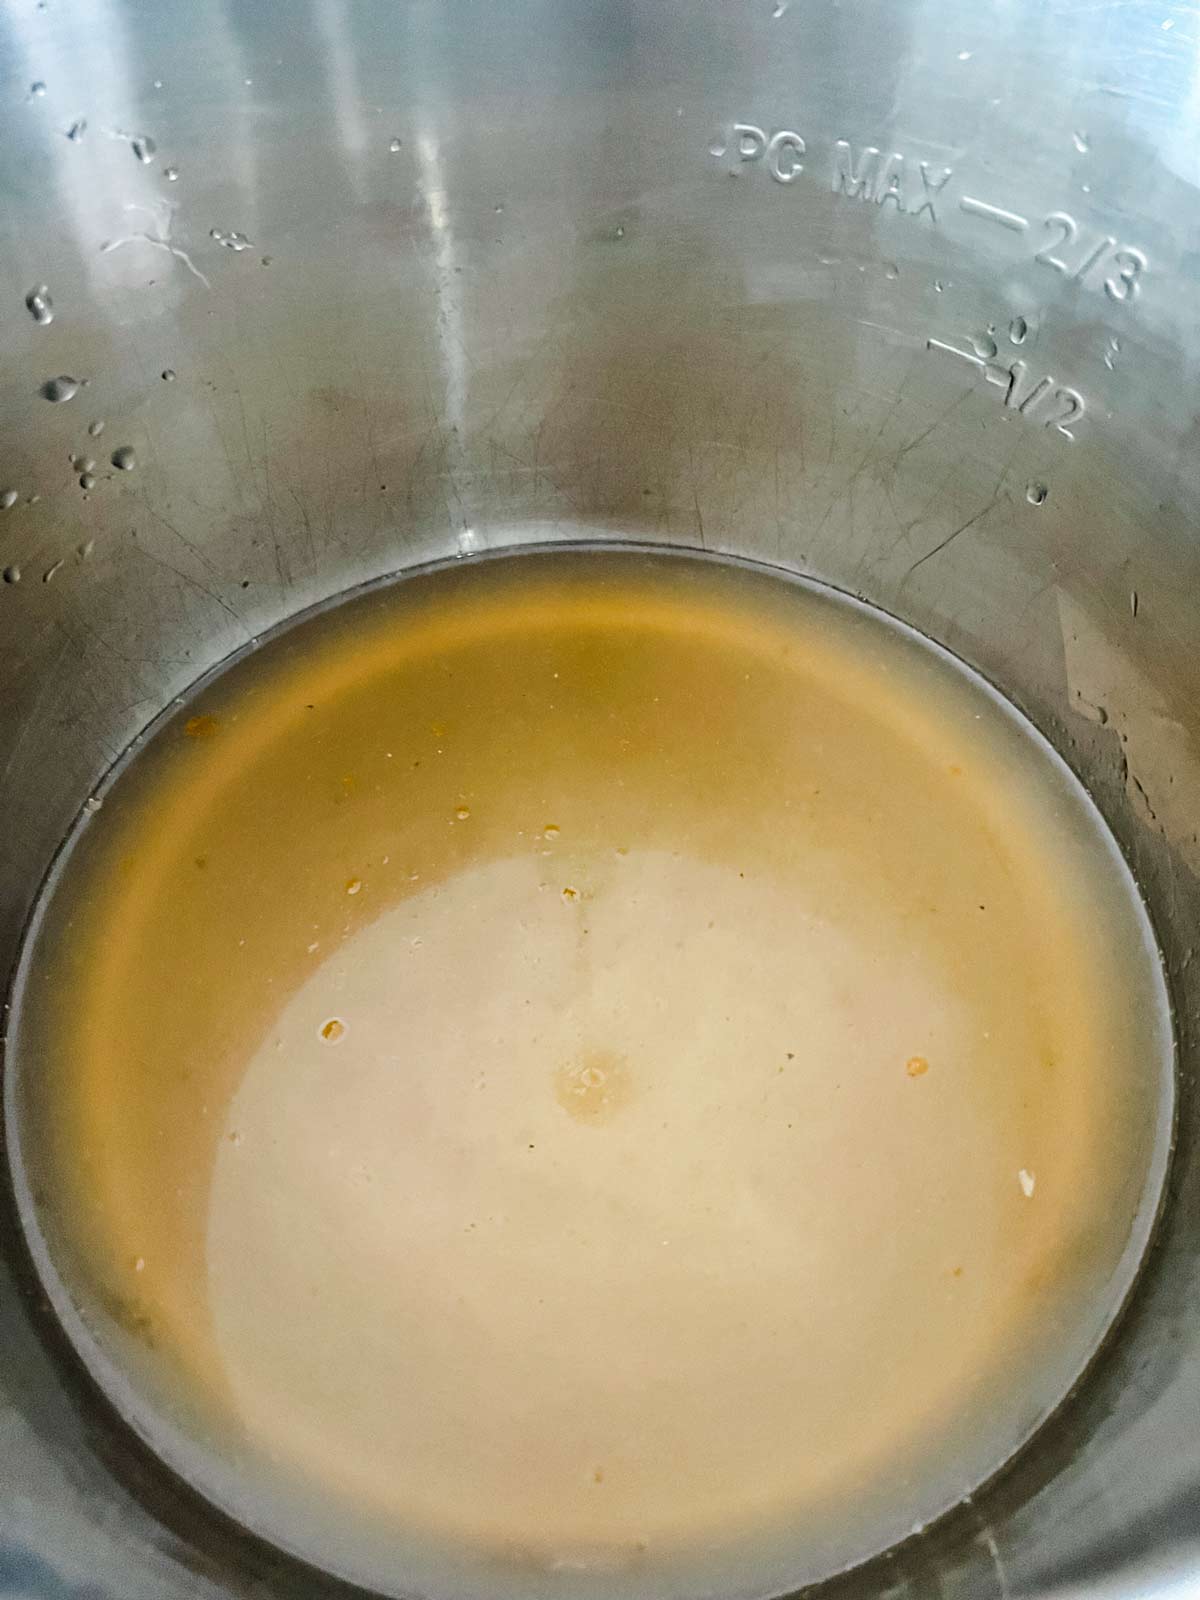 Broth in the bottom of an Instant Pot.